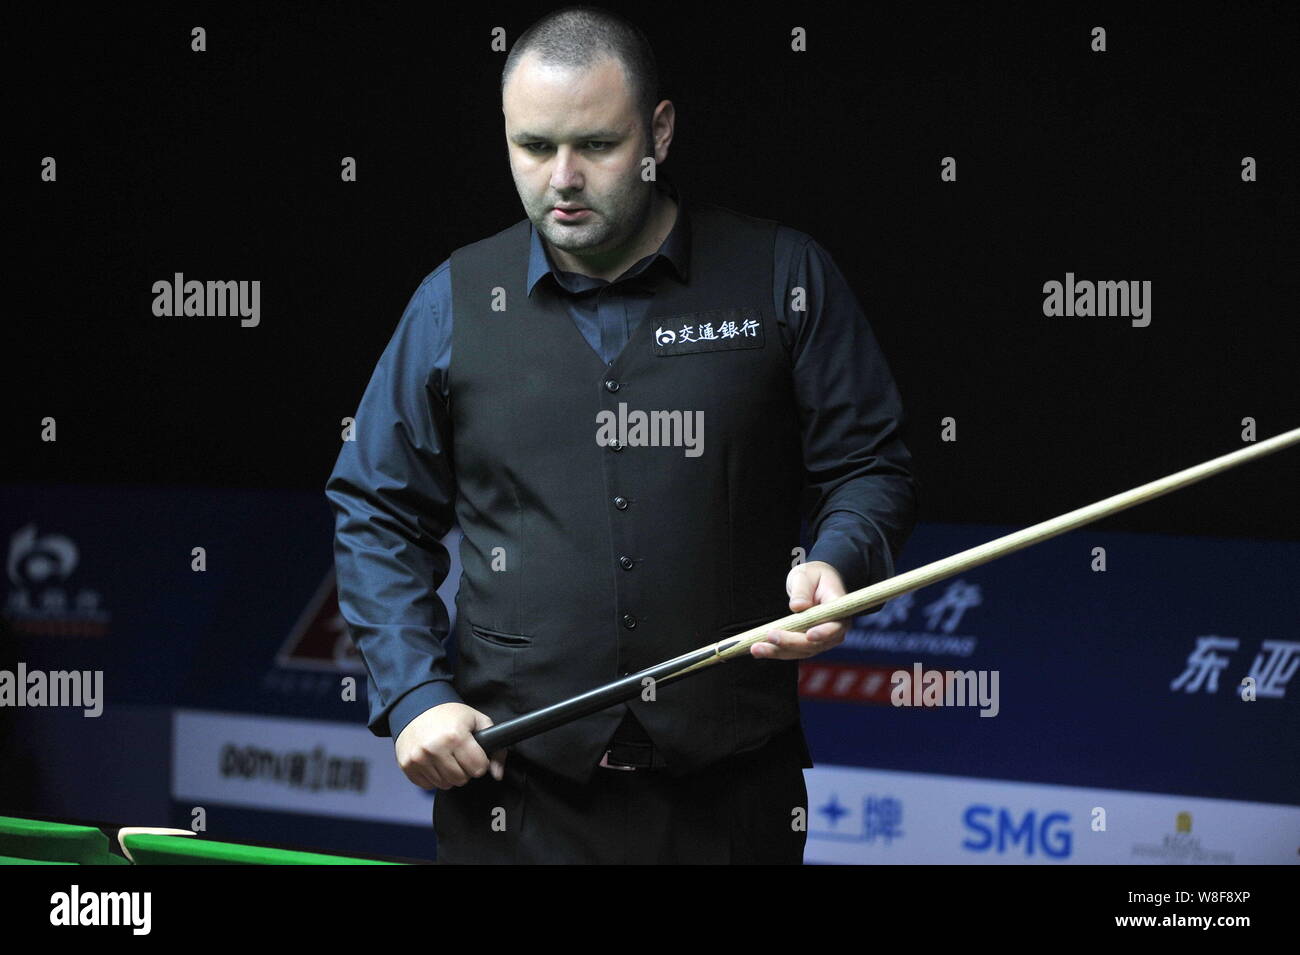 Stephen Maguire of England considers a shot against Michael Holt of England during their first round match of the 2015 World Snooker Shanghai Masters Stock Photo